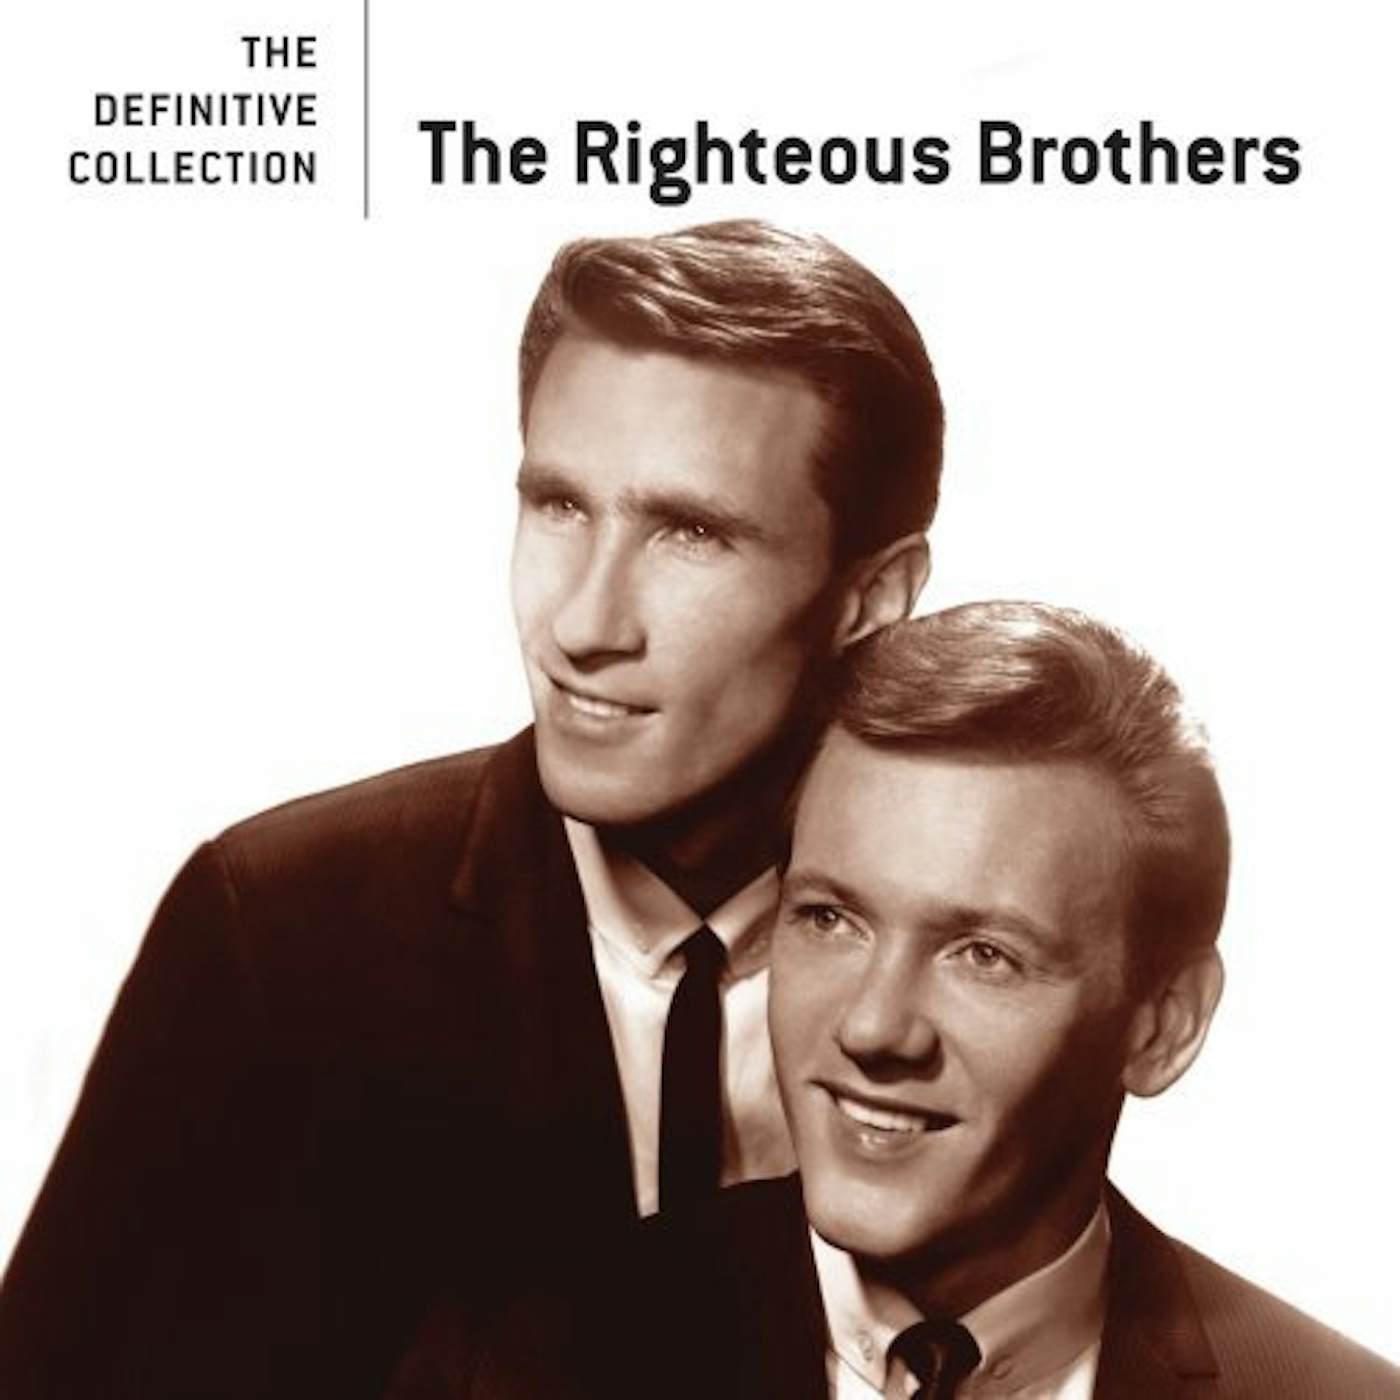 The Righteous Brothers DEFINITIVE COLLECTION CD